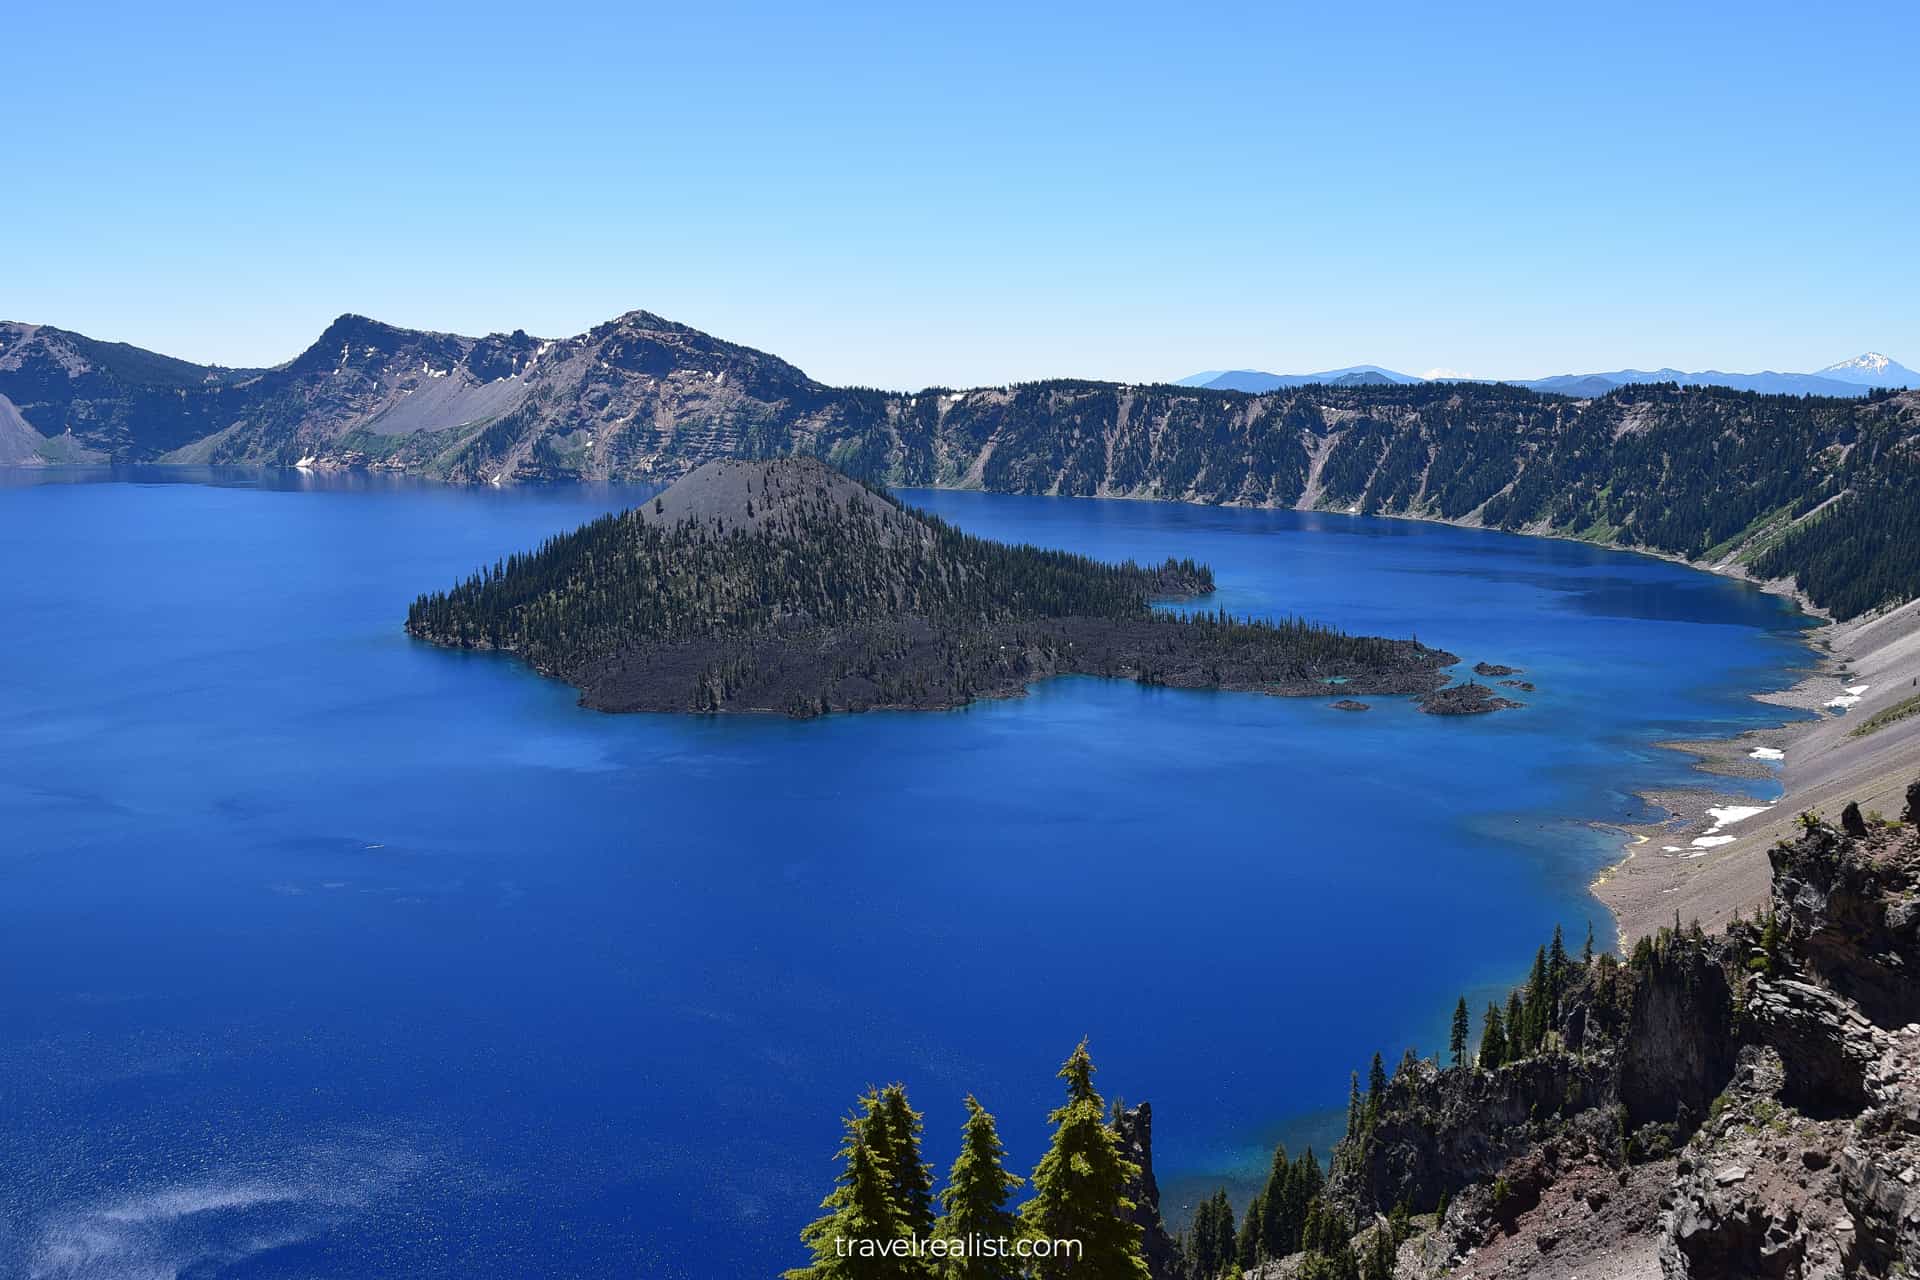 Breathtaking water colors of Crater Lake in Oregon, US